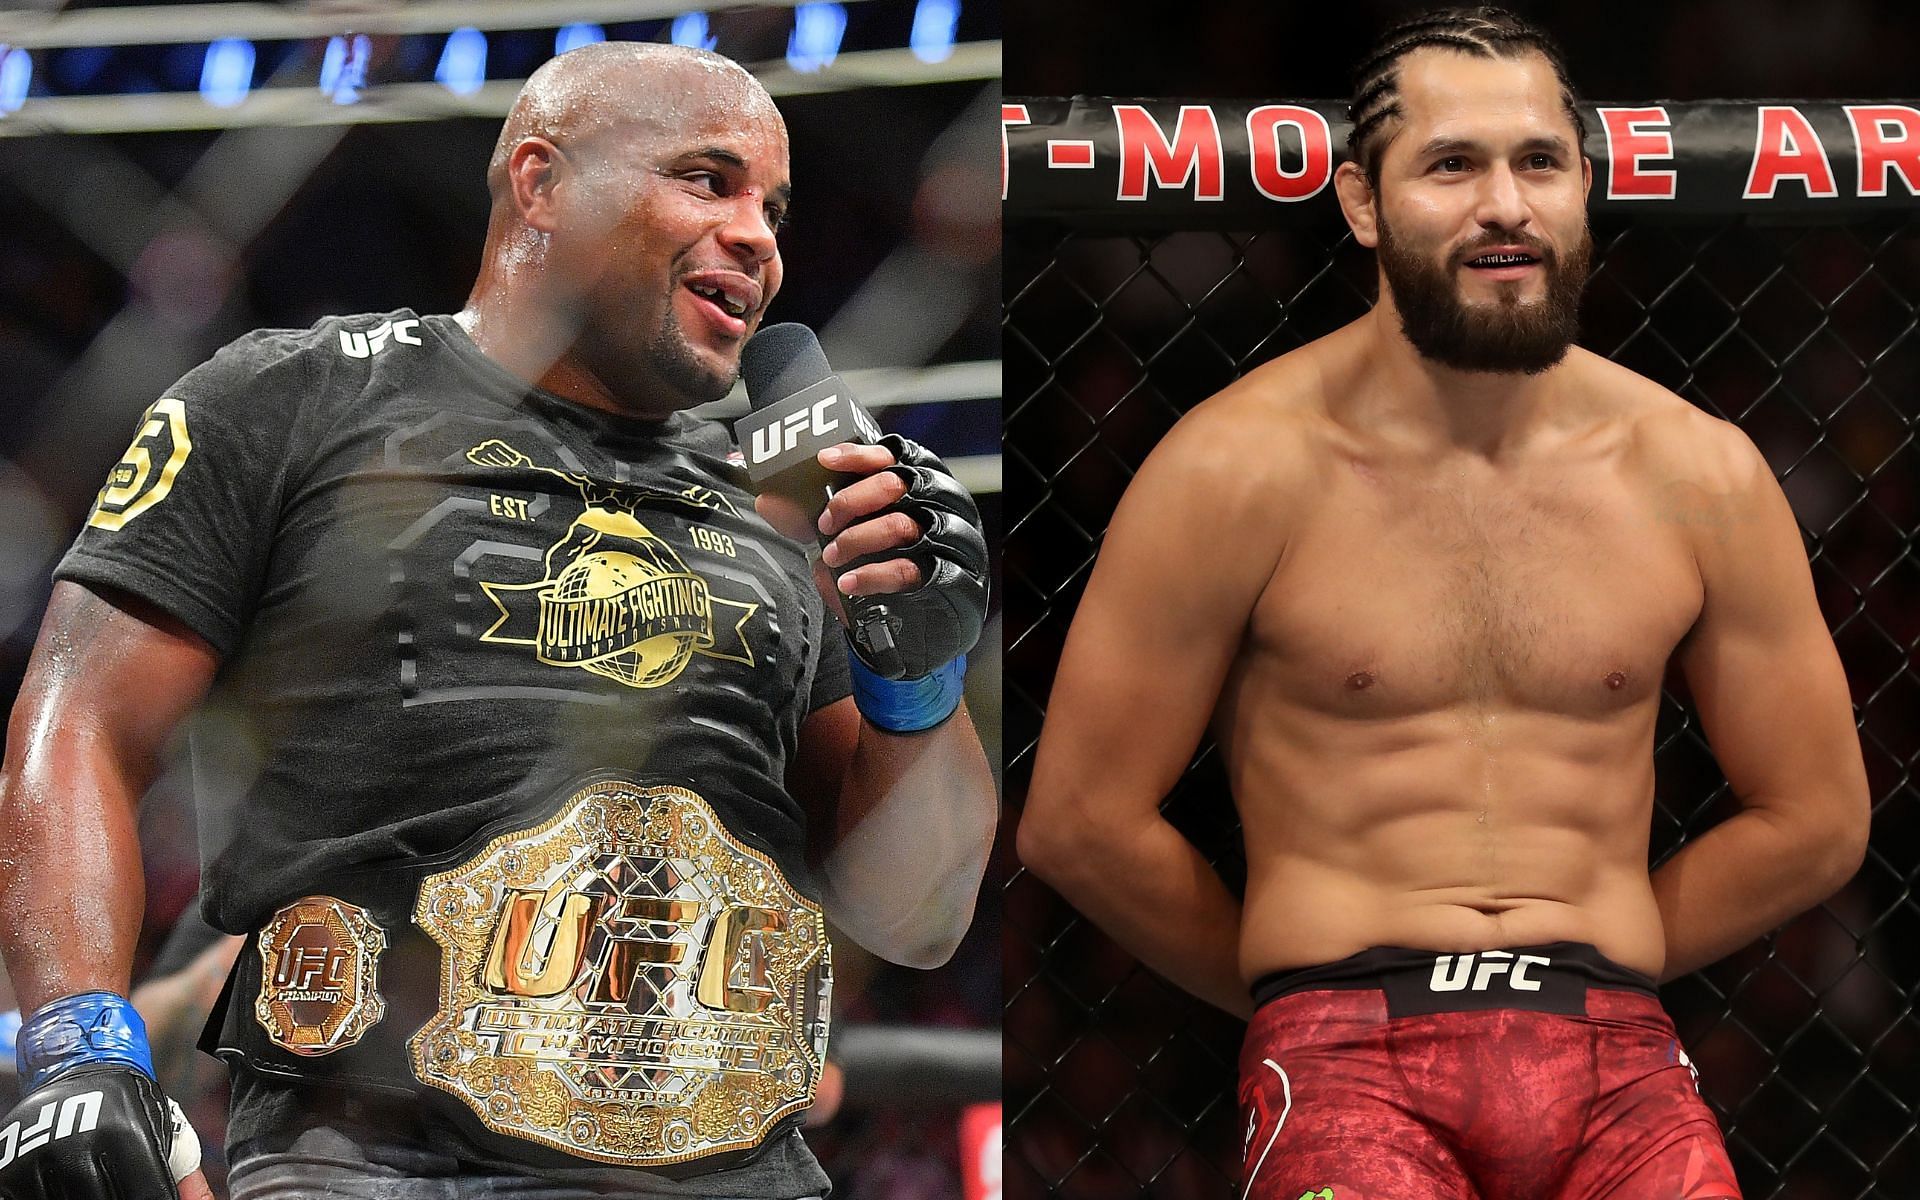 Daniel Cormier (left) and Jorge Masvidal (right). [Images courtesy: Getty Images]